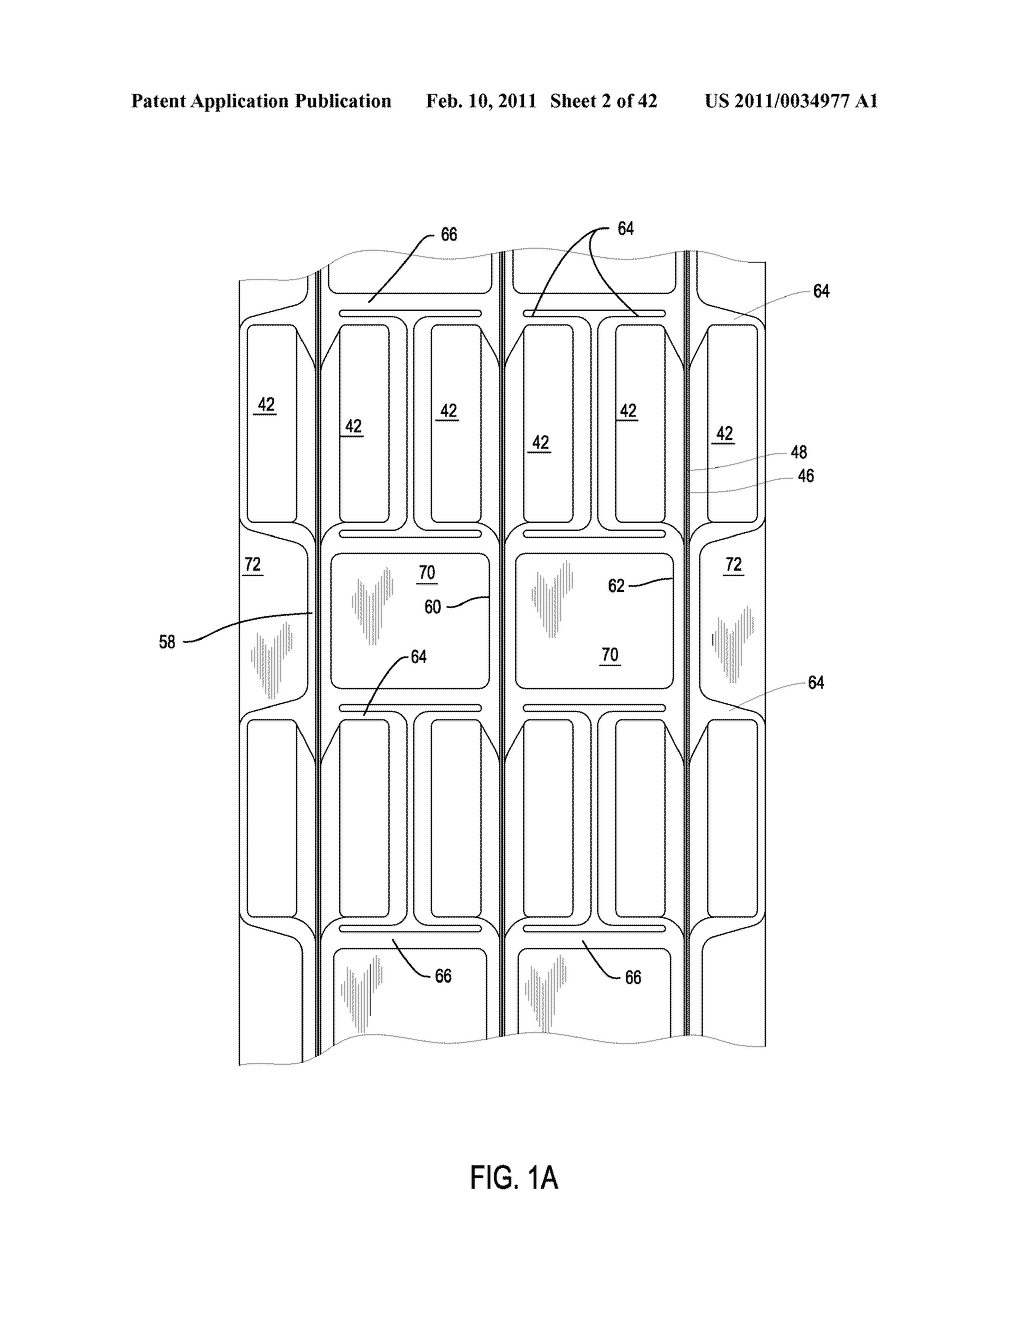 IMPLANTABLE ELECTRODE ARRAY ASSEMBLY INCLUDING A CARRIER FOR SUPPORTING THE ELECTRODES AND CONTROL MODULES FOR REGULATING OPERATION OF THE ELECTRODES EMBEDDED IN THE CARRIER, AND METHOD OF MAKING SAME - diagram, schematic, and image 03